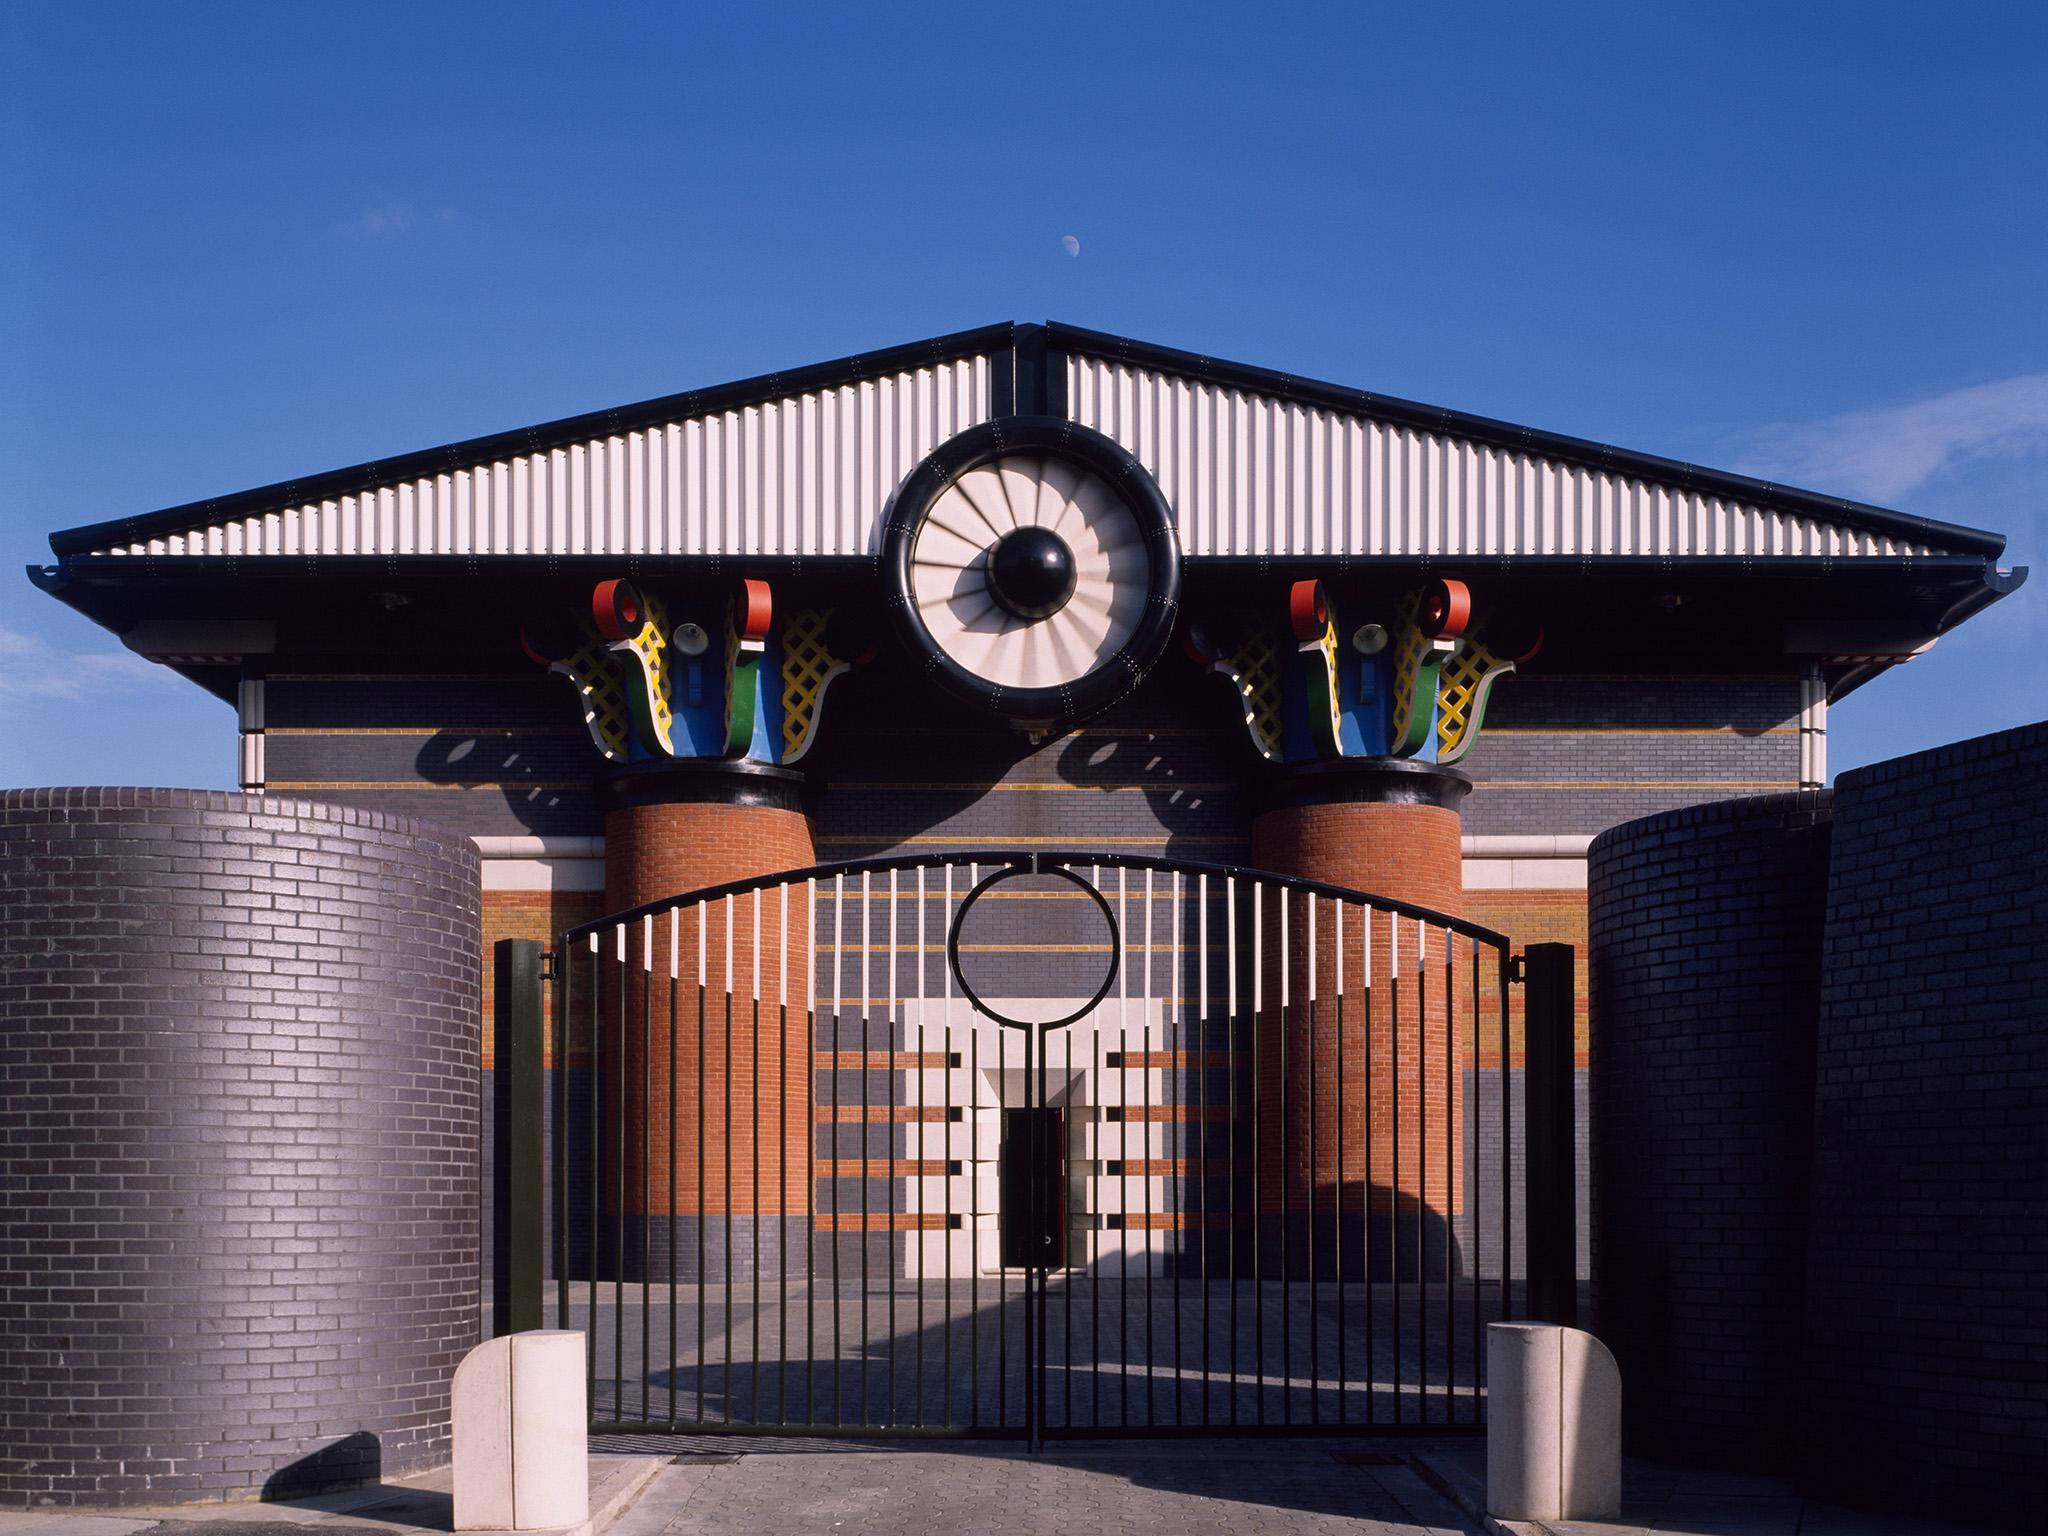 Egyptian temple or pumping station? John Outram’s Isle of Dogs building was grade II listed in 2017 (Alamy)